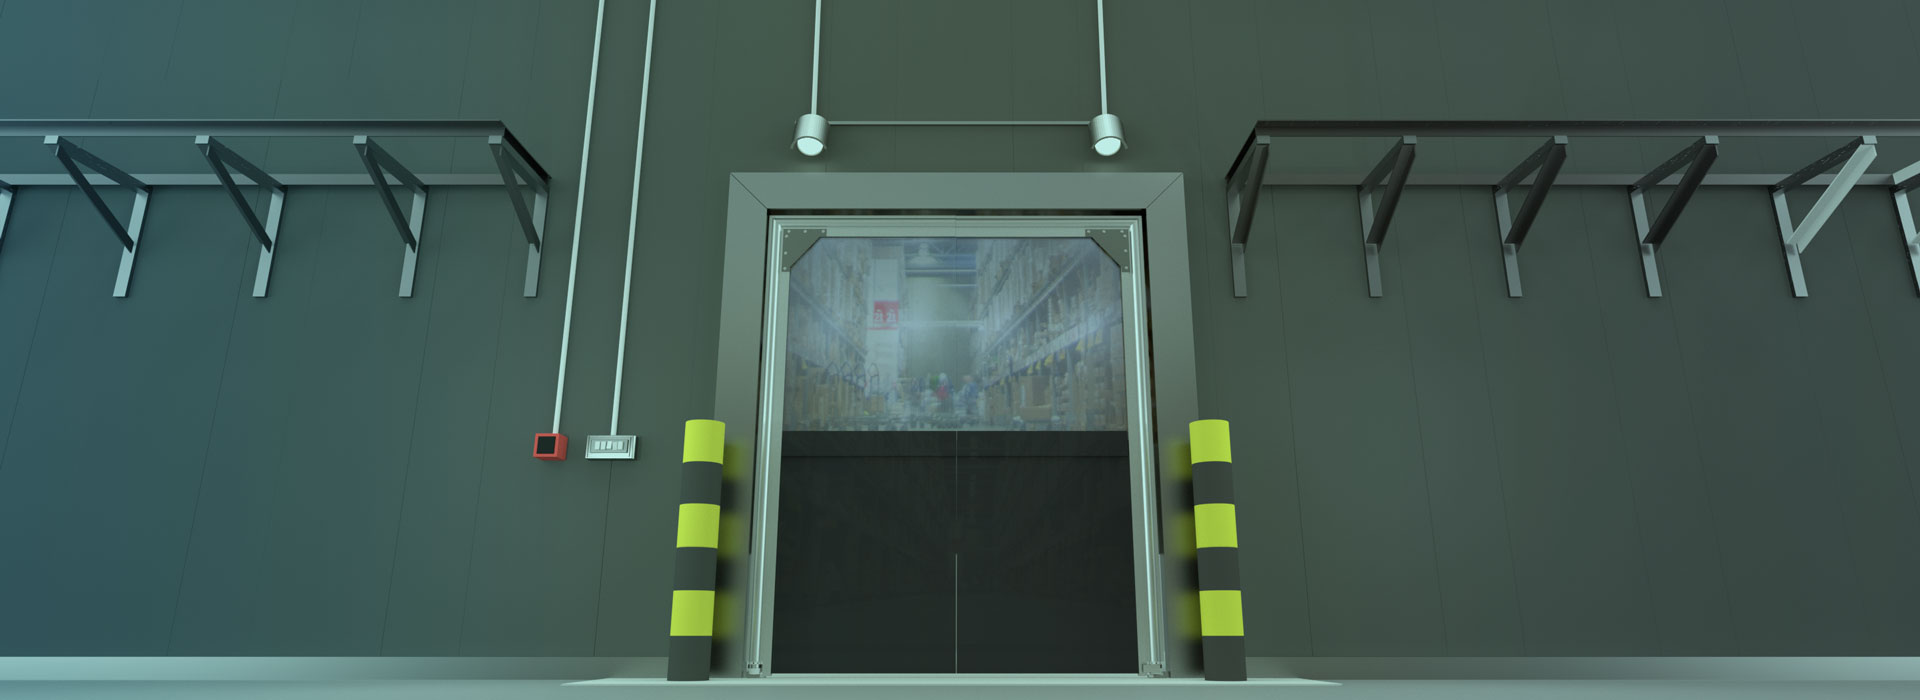 A processed image of a pvc crash door in a warehouse environment